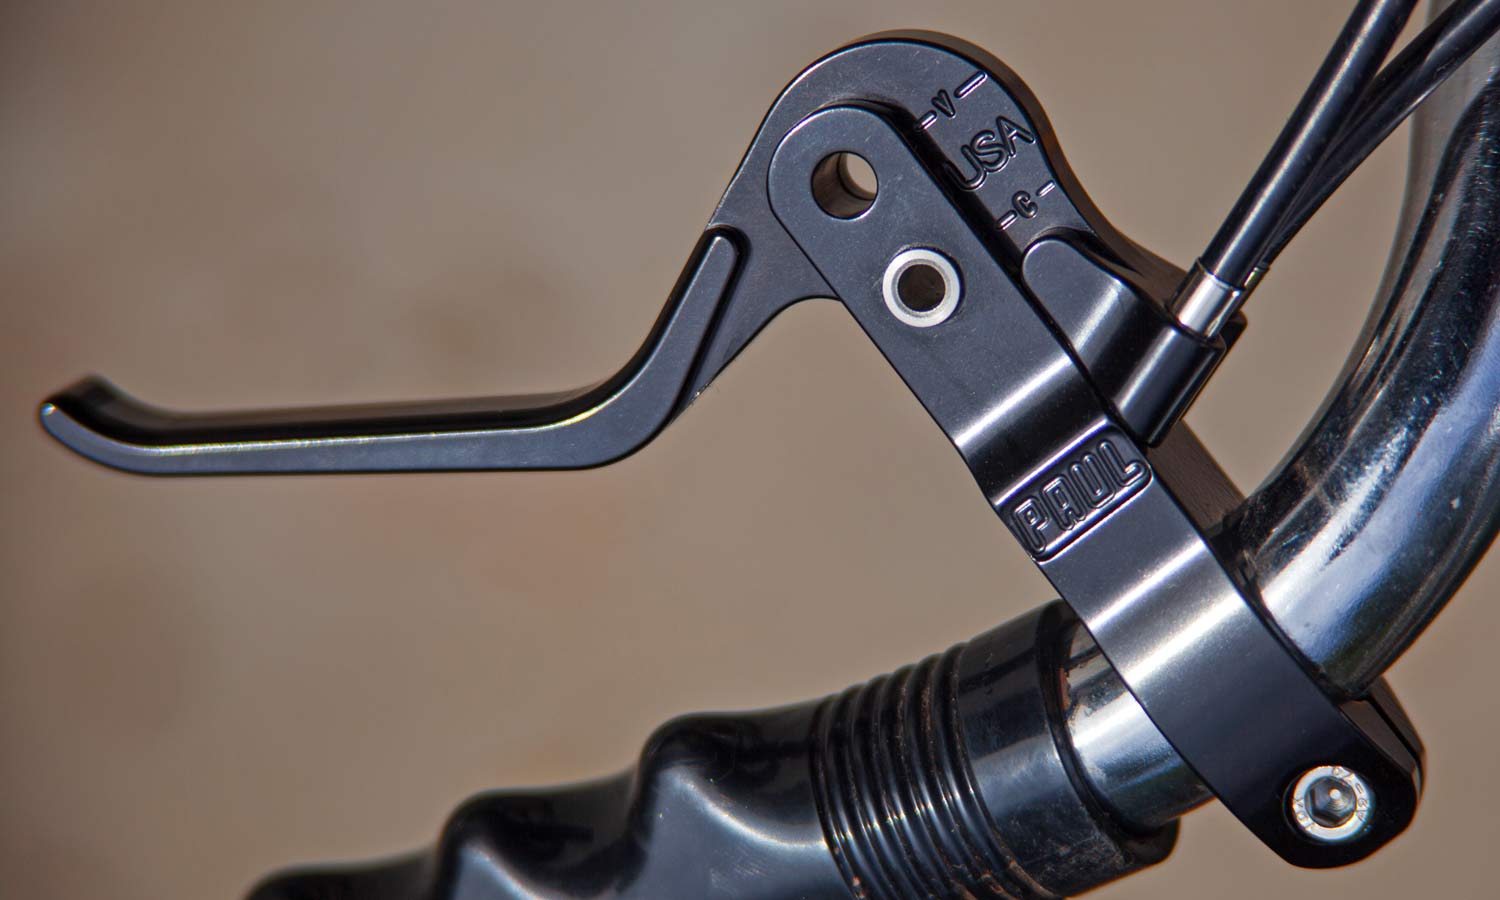 Paul Duplex brake lever, US-made CNC machined double brake lever, 2 brakes 1 lever